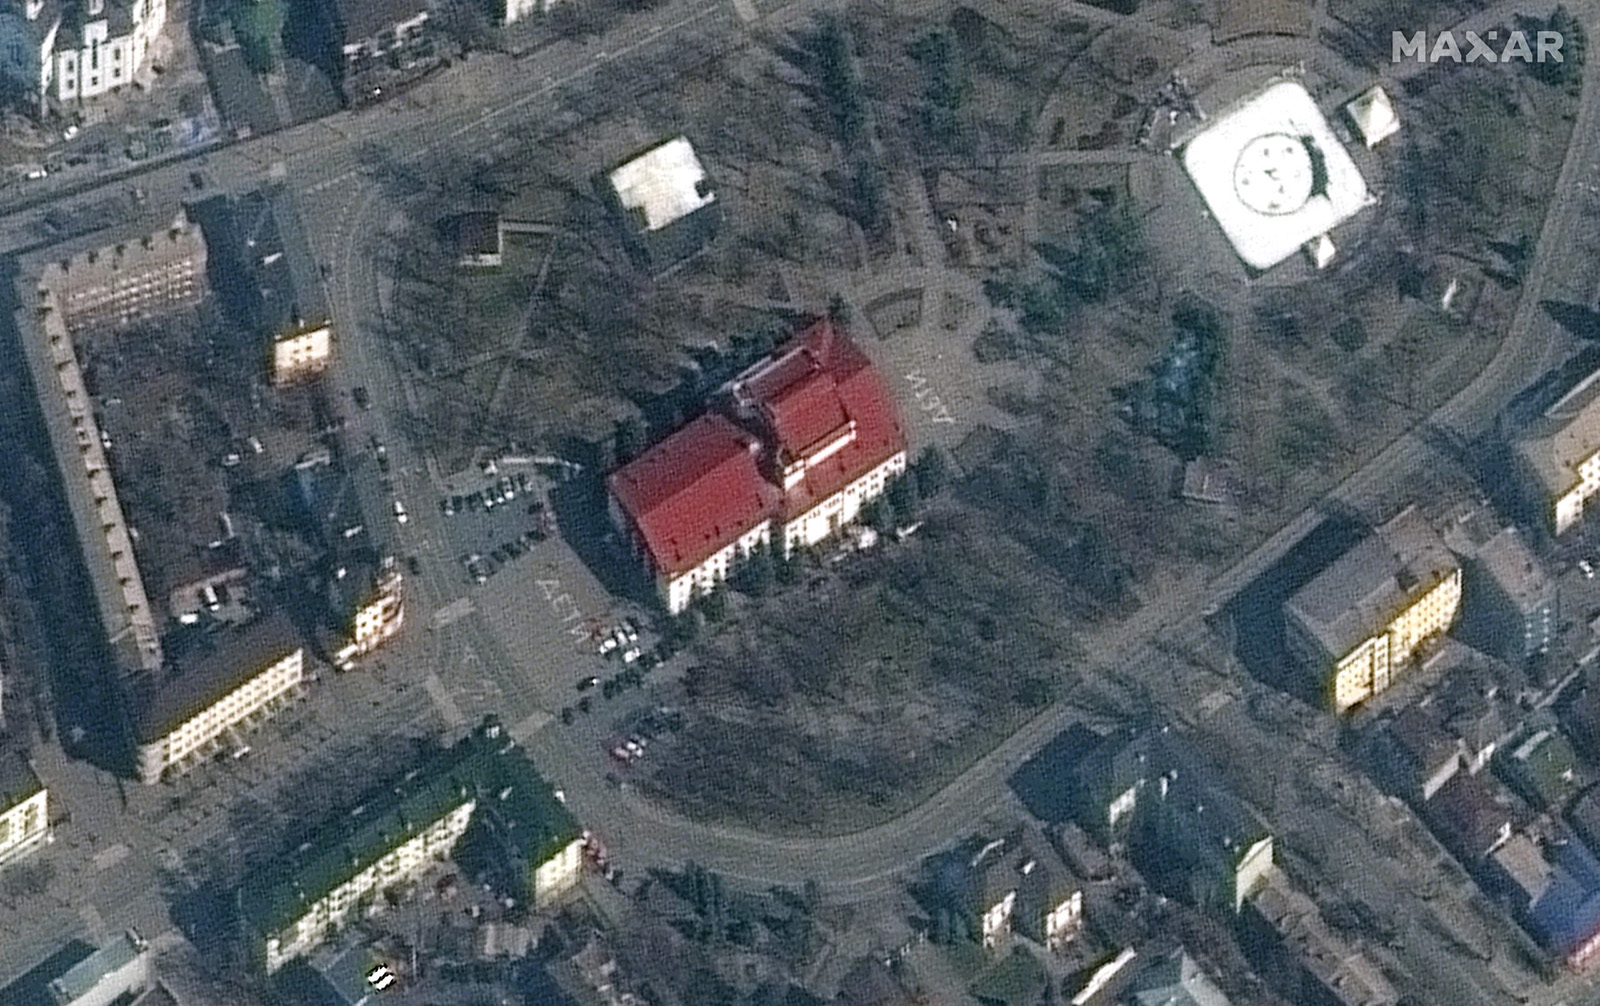 The Donetsk Regional Theatre of Drama in Mariupol, Ukraine, is seen in this satellite image from March 14.